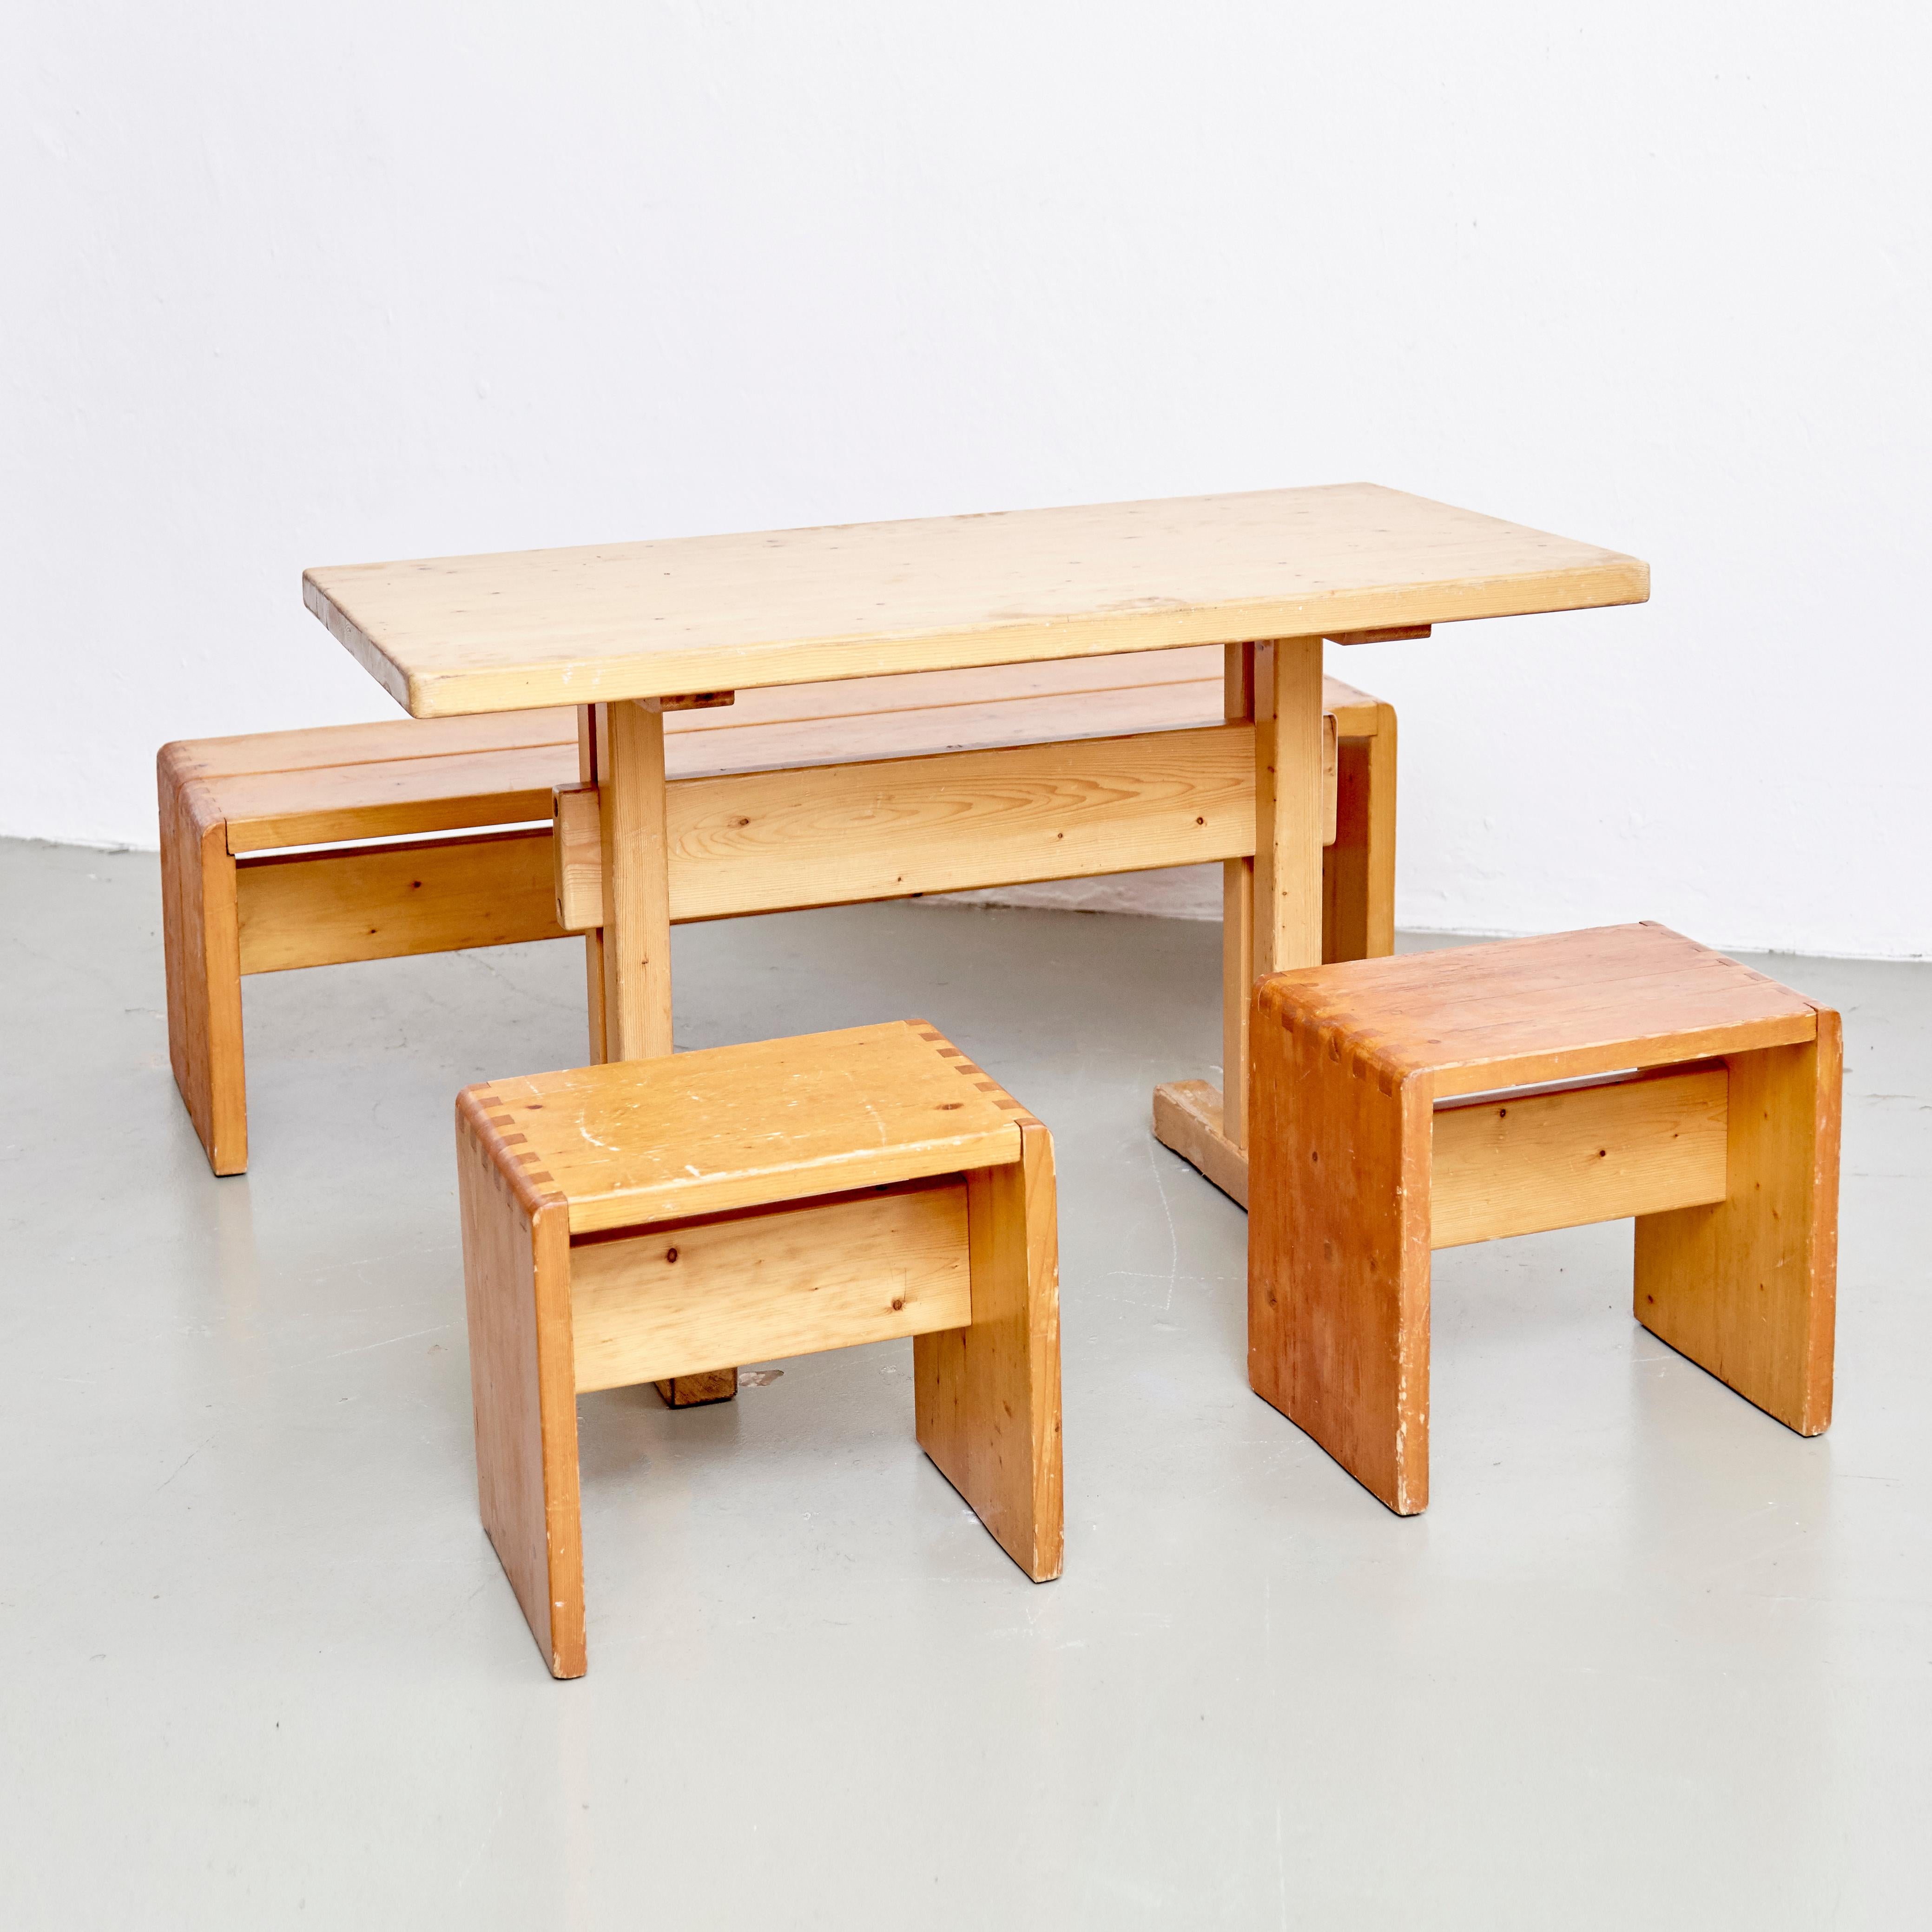 Mid-Century Modern Charlotte Perriand Table, Stools and Bench for Les Arcs